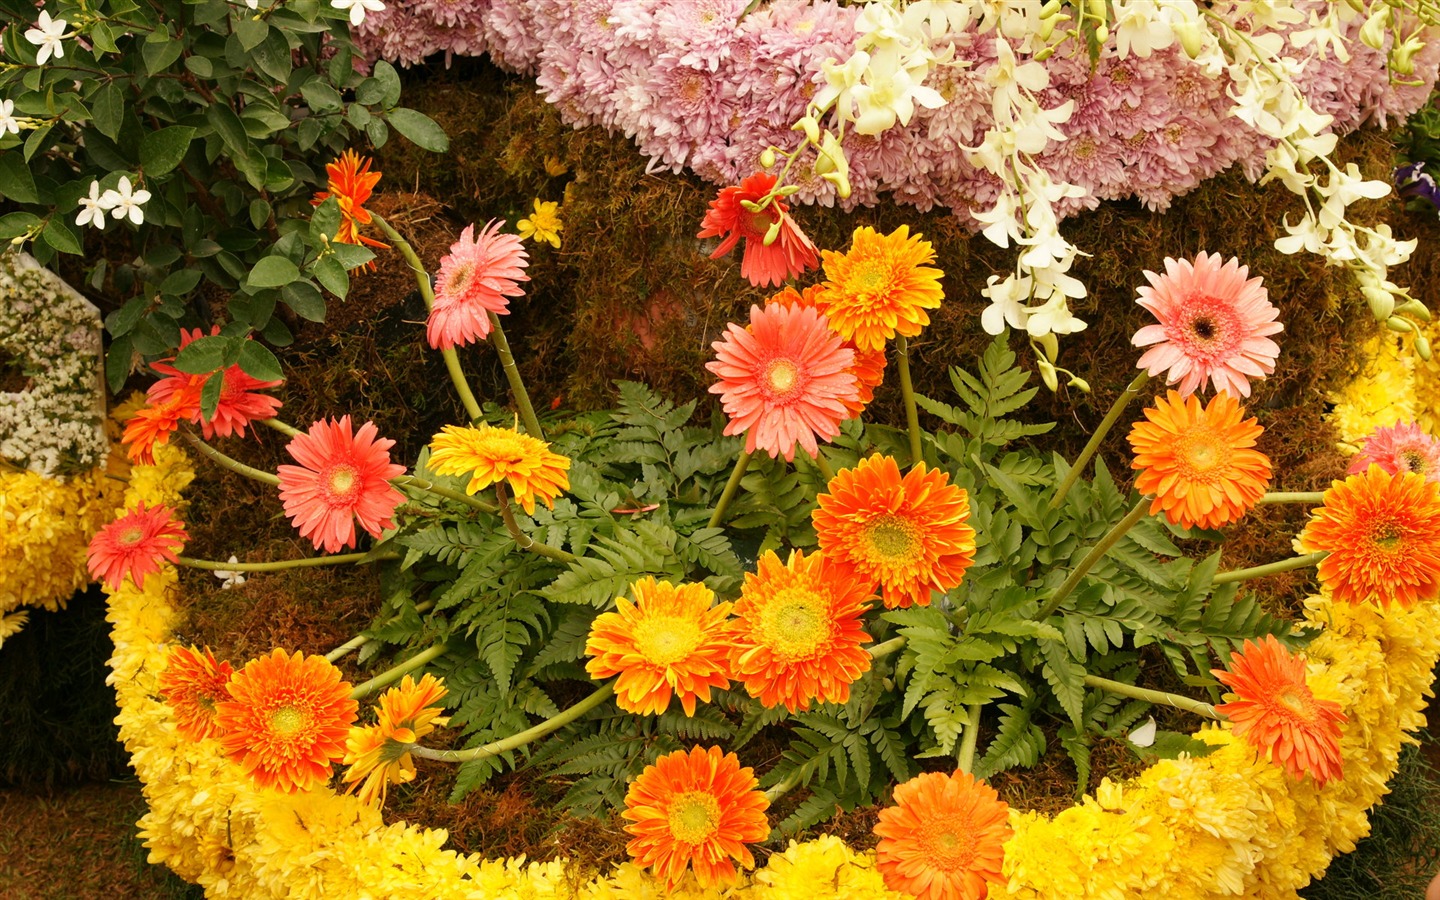 Colorful flowers decorate wallpaper (4) #19 - 1440x900